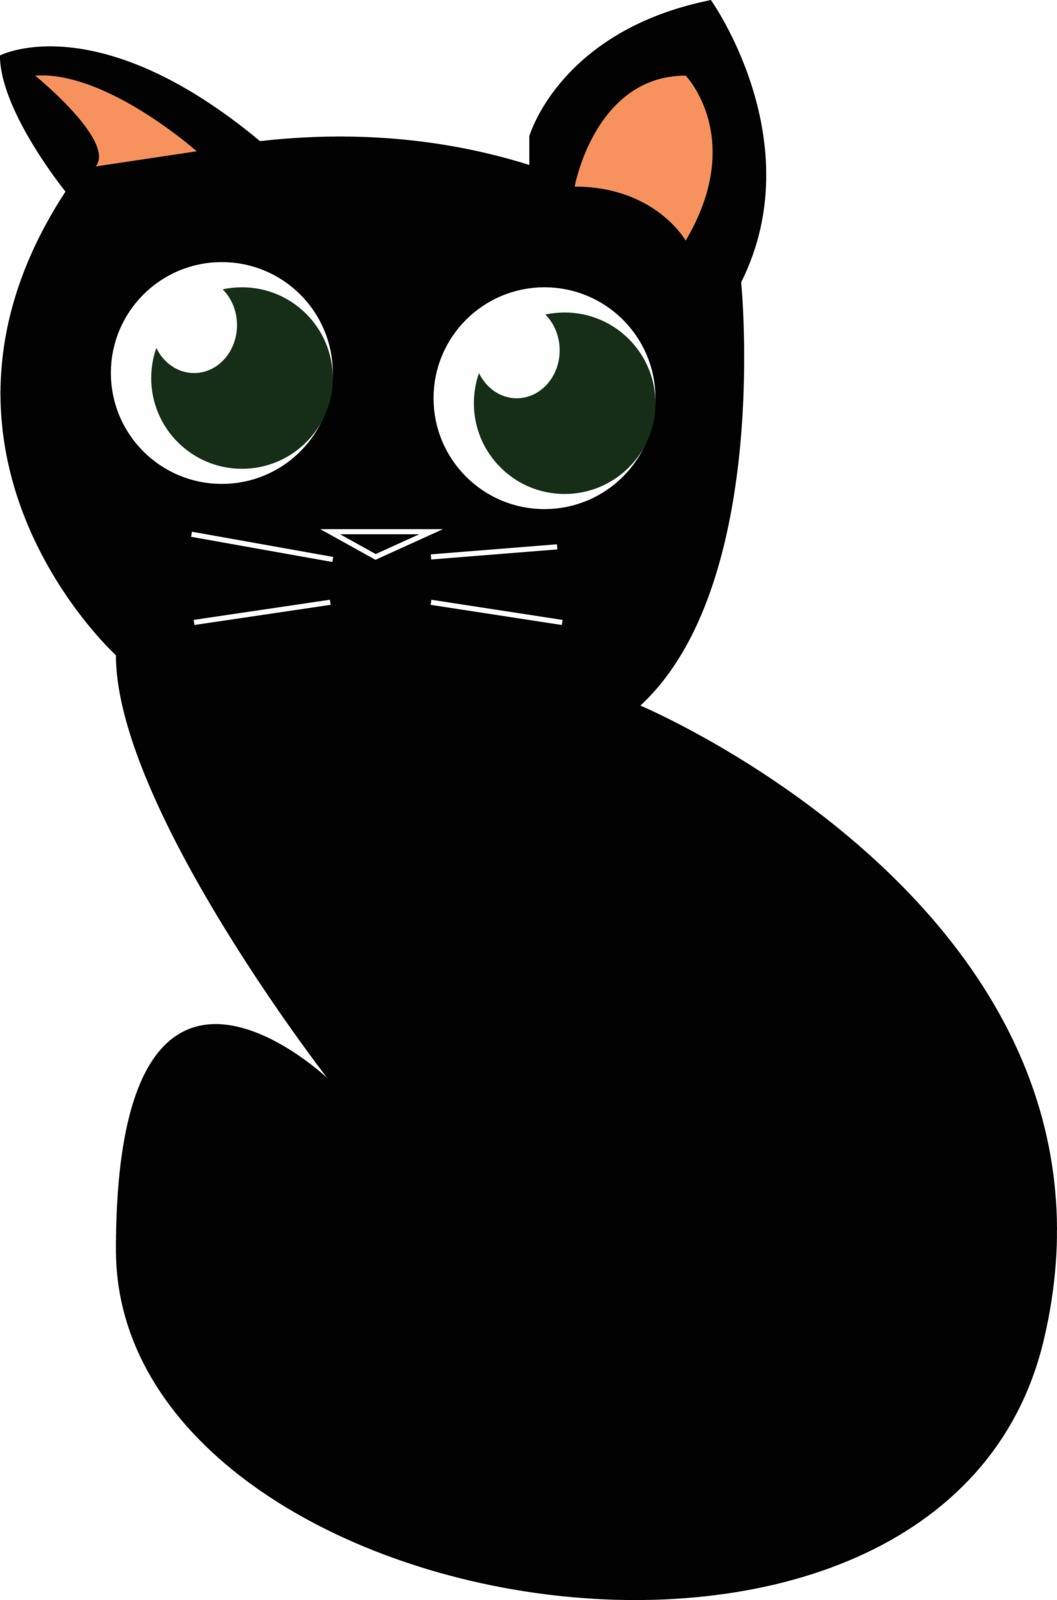 A black kitten with round eyes is looking at something vector color drawing or illustration 